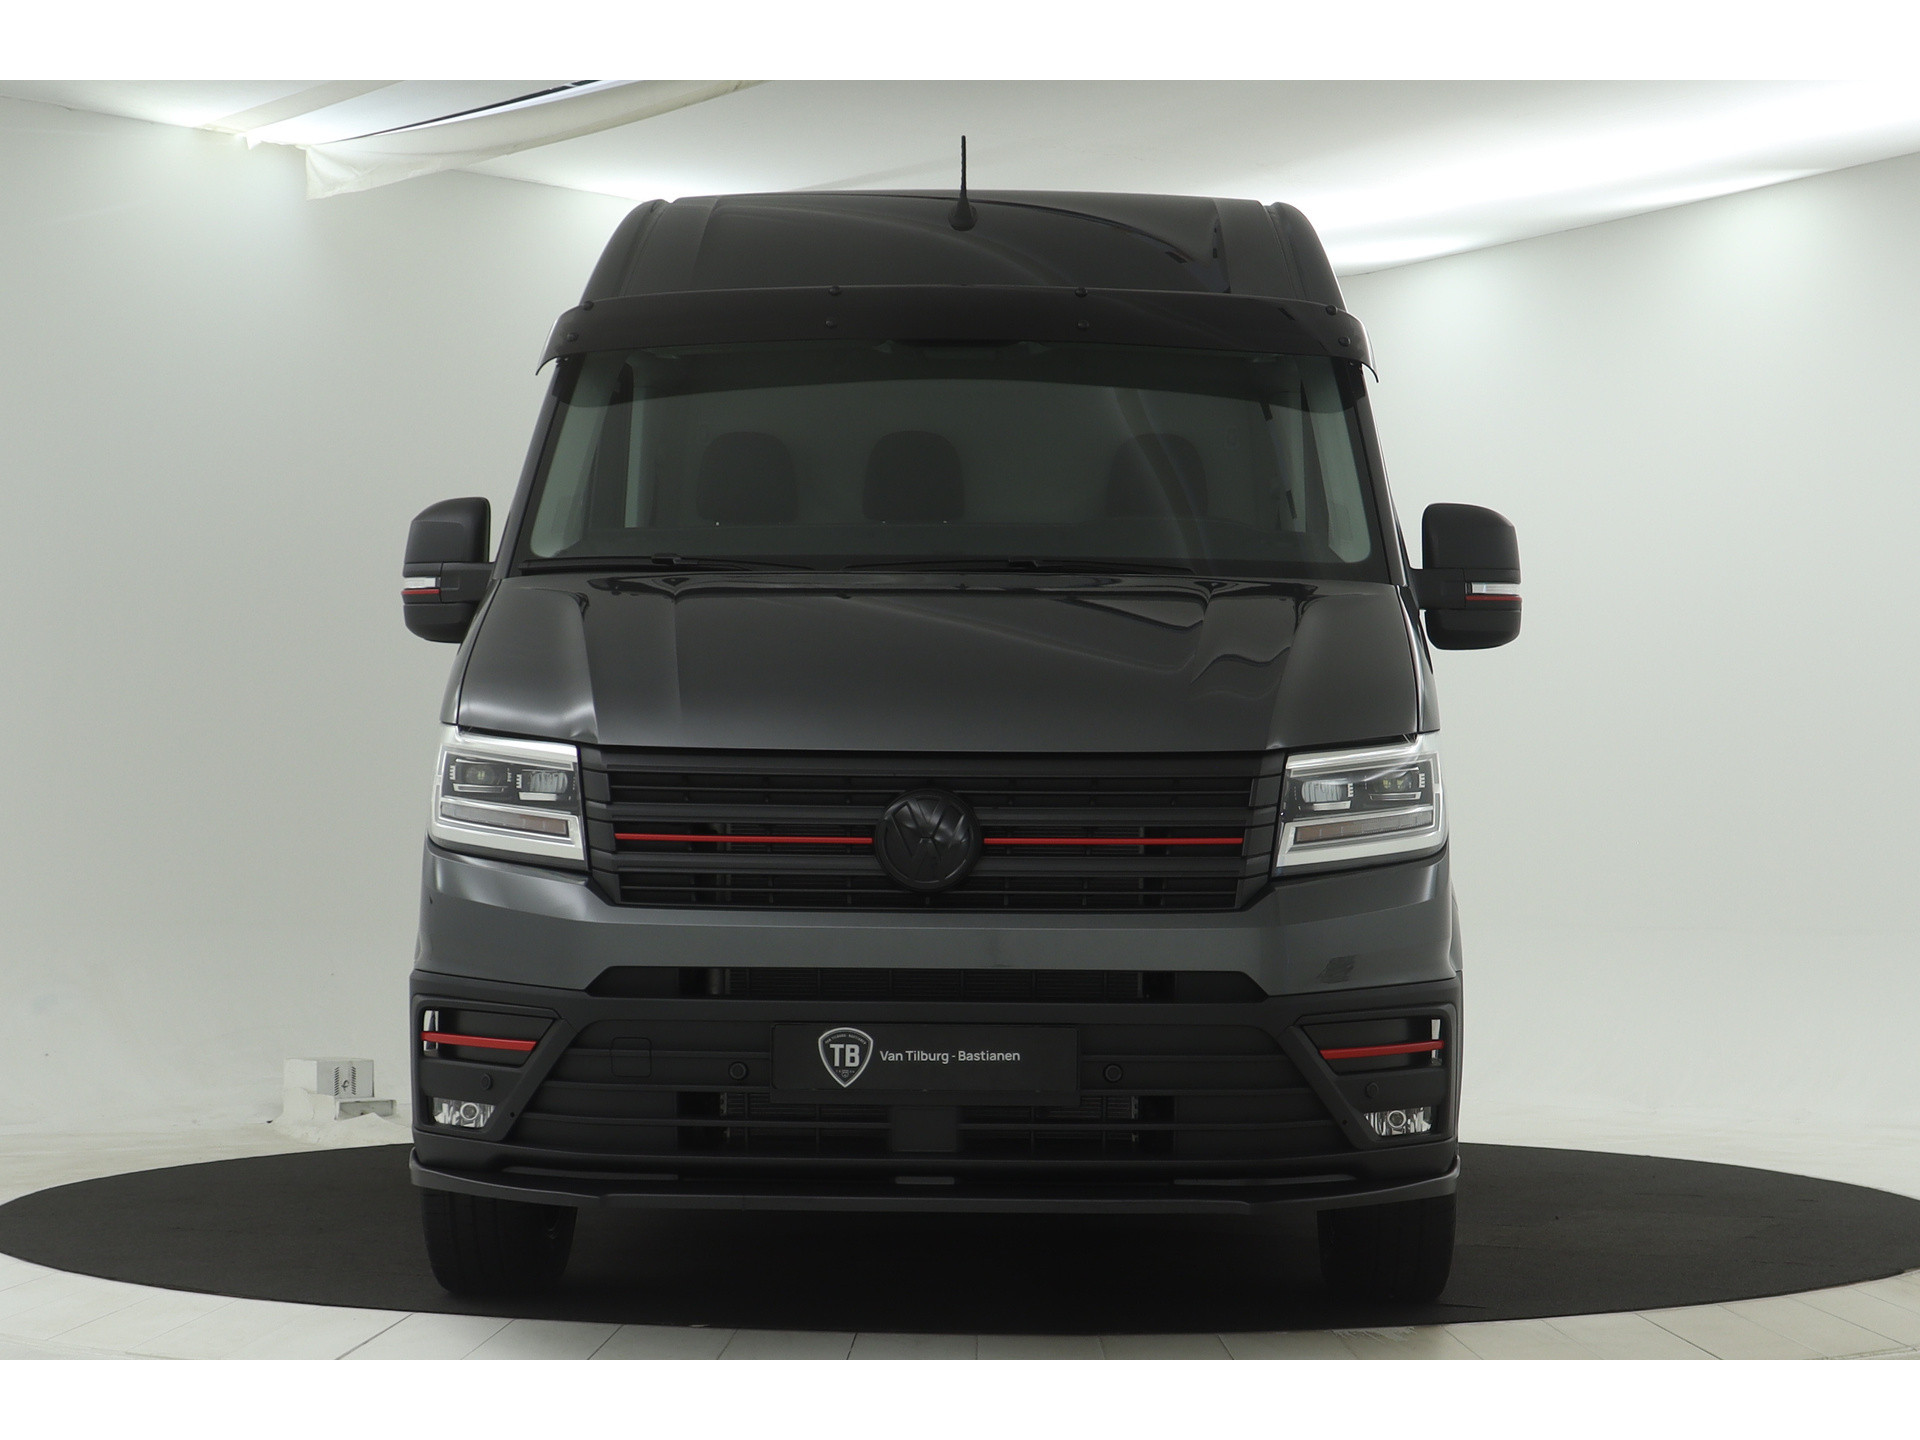 Volkswagen - Crafter VW Crafter 35 2.0 TDI L3H3 Exclusive Hero Edition - 2023